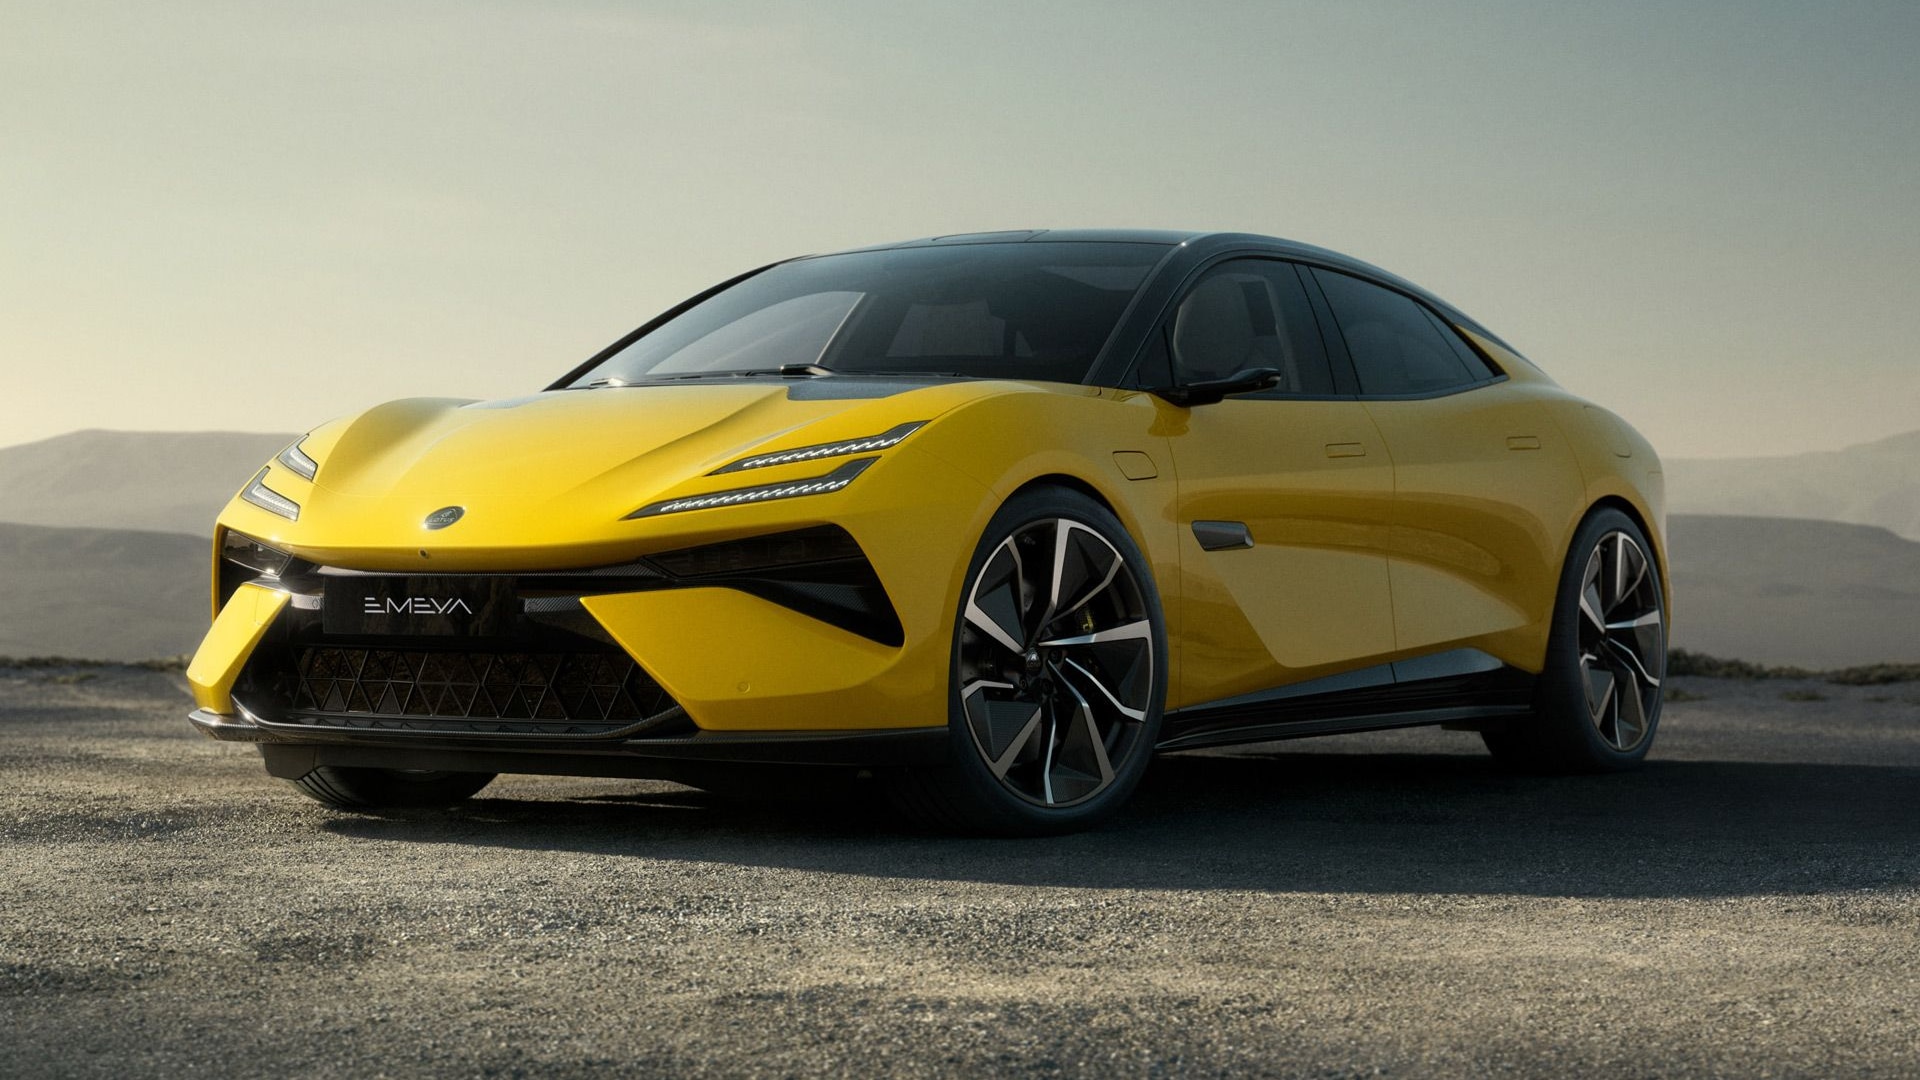 Lotus Emeya electric super sedan revealed with up to 905 hp